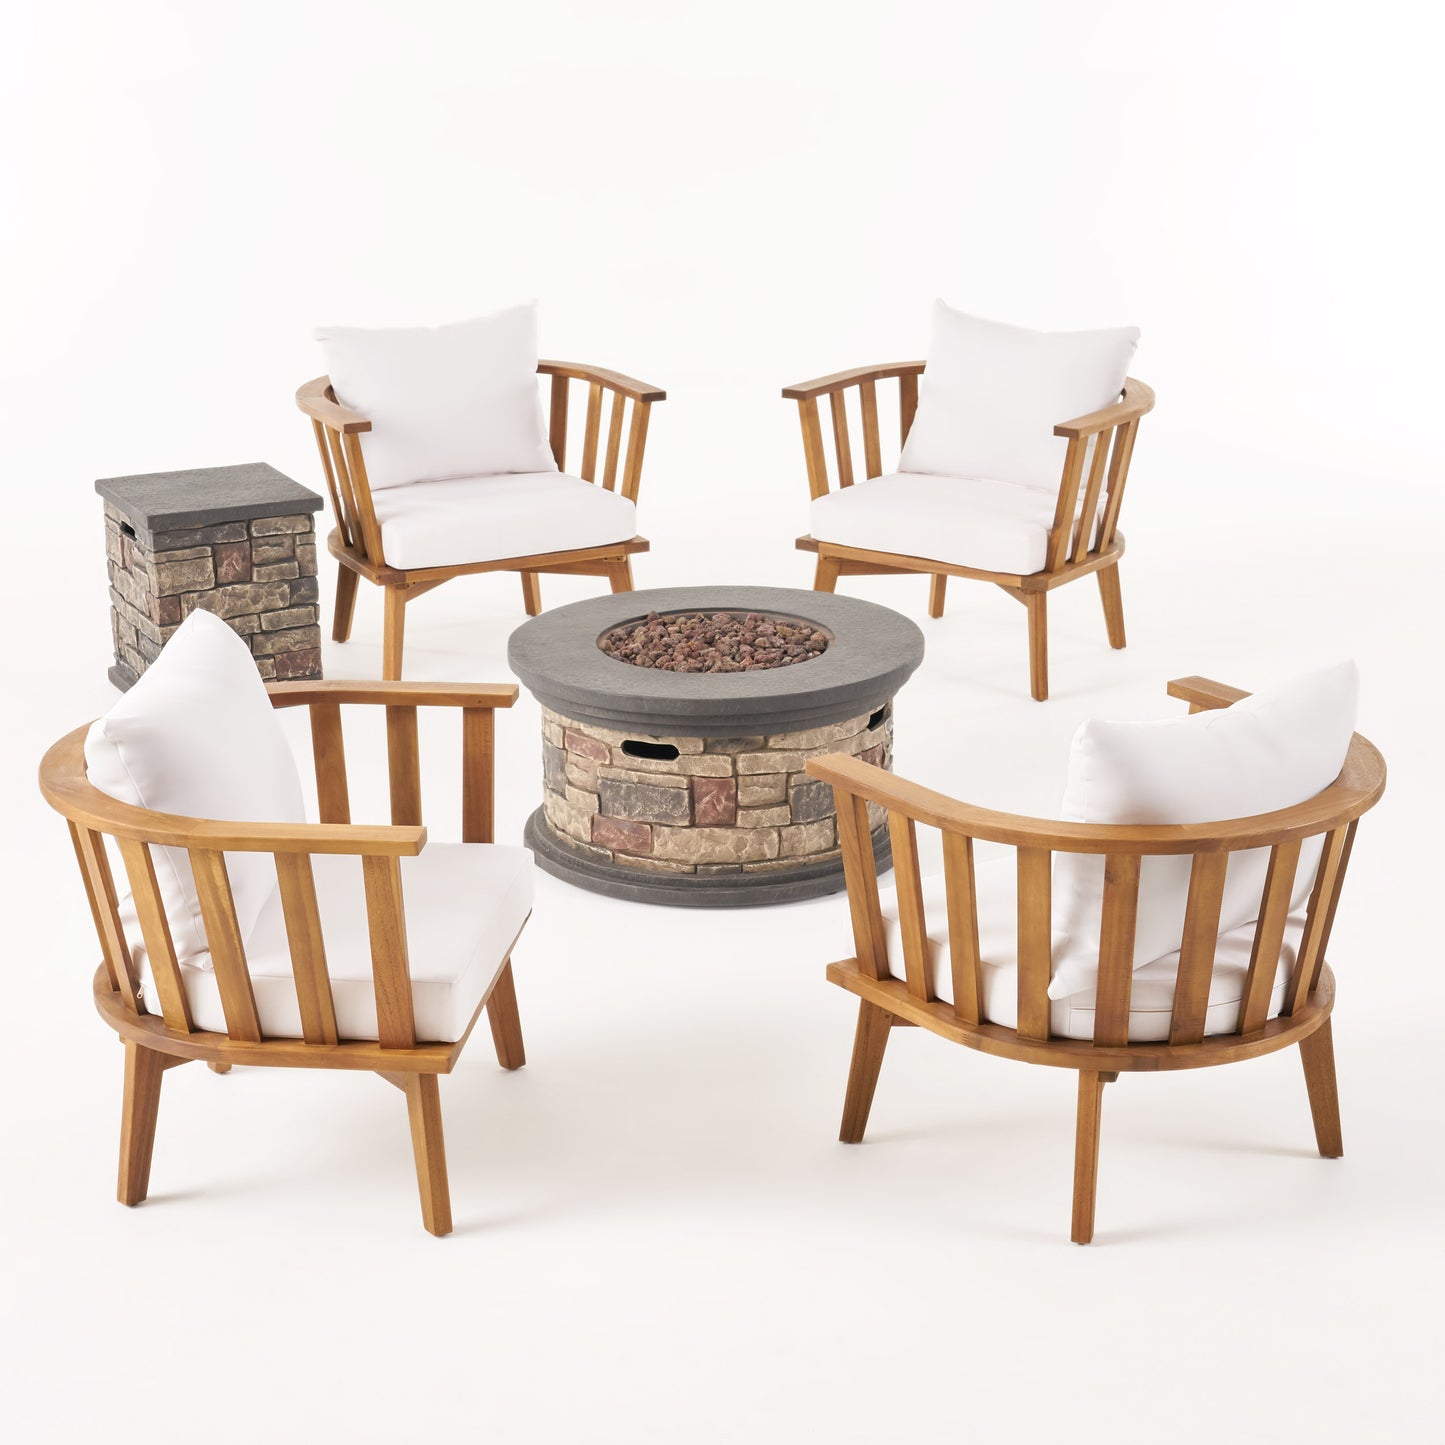 Julianna Outdoor Acacia Wood 4 Seater Club Chairs and Fire Pit Set